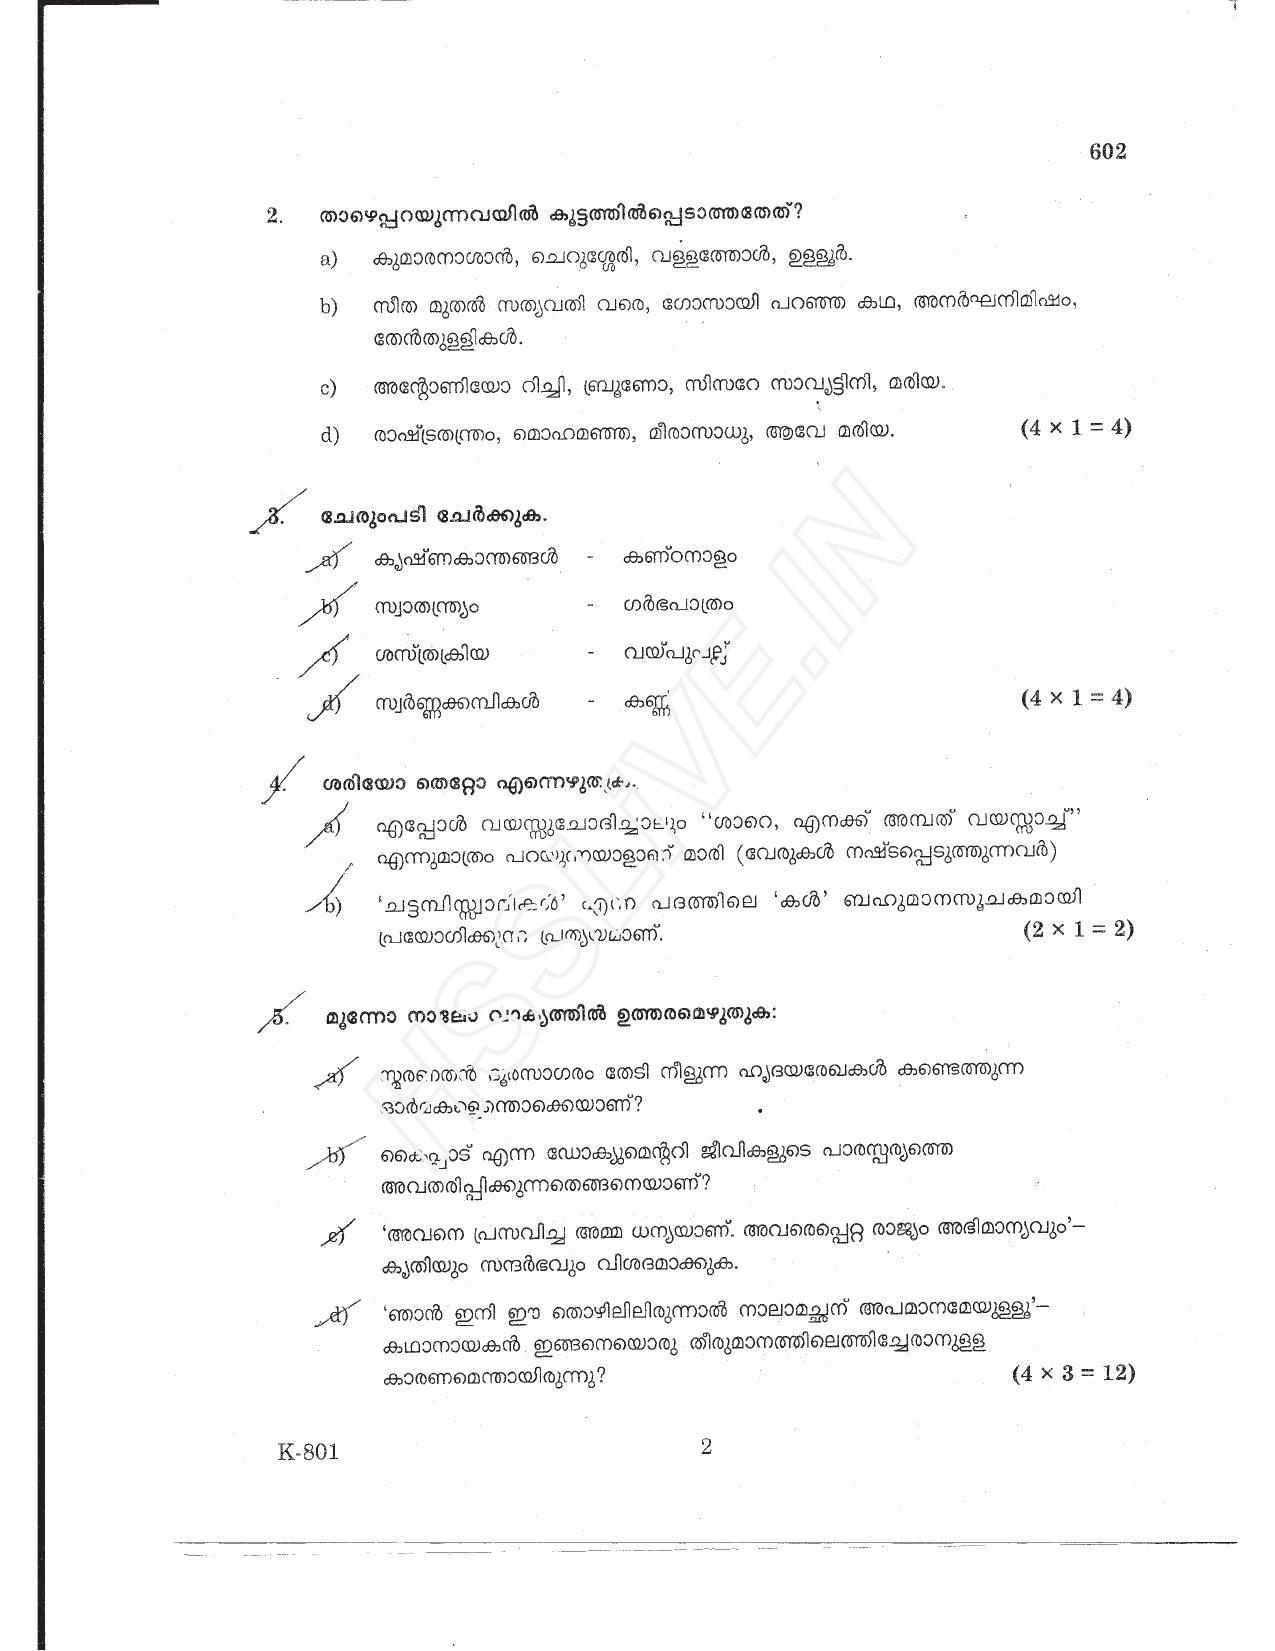 Kerala Plus One 2017 Malayalam Question Papers - Page 2